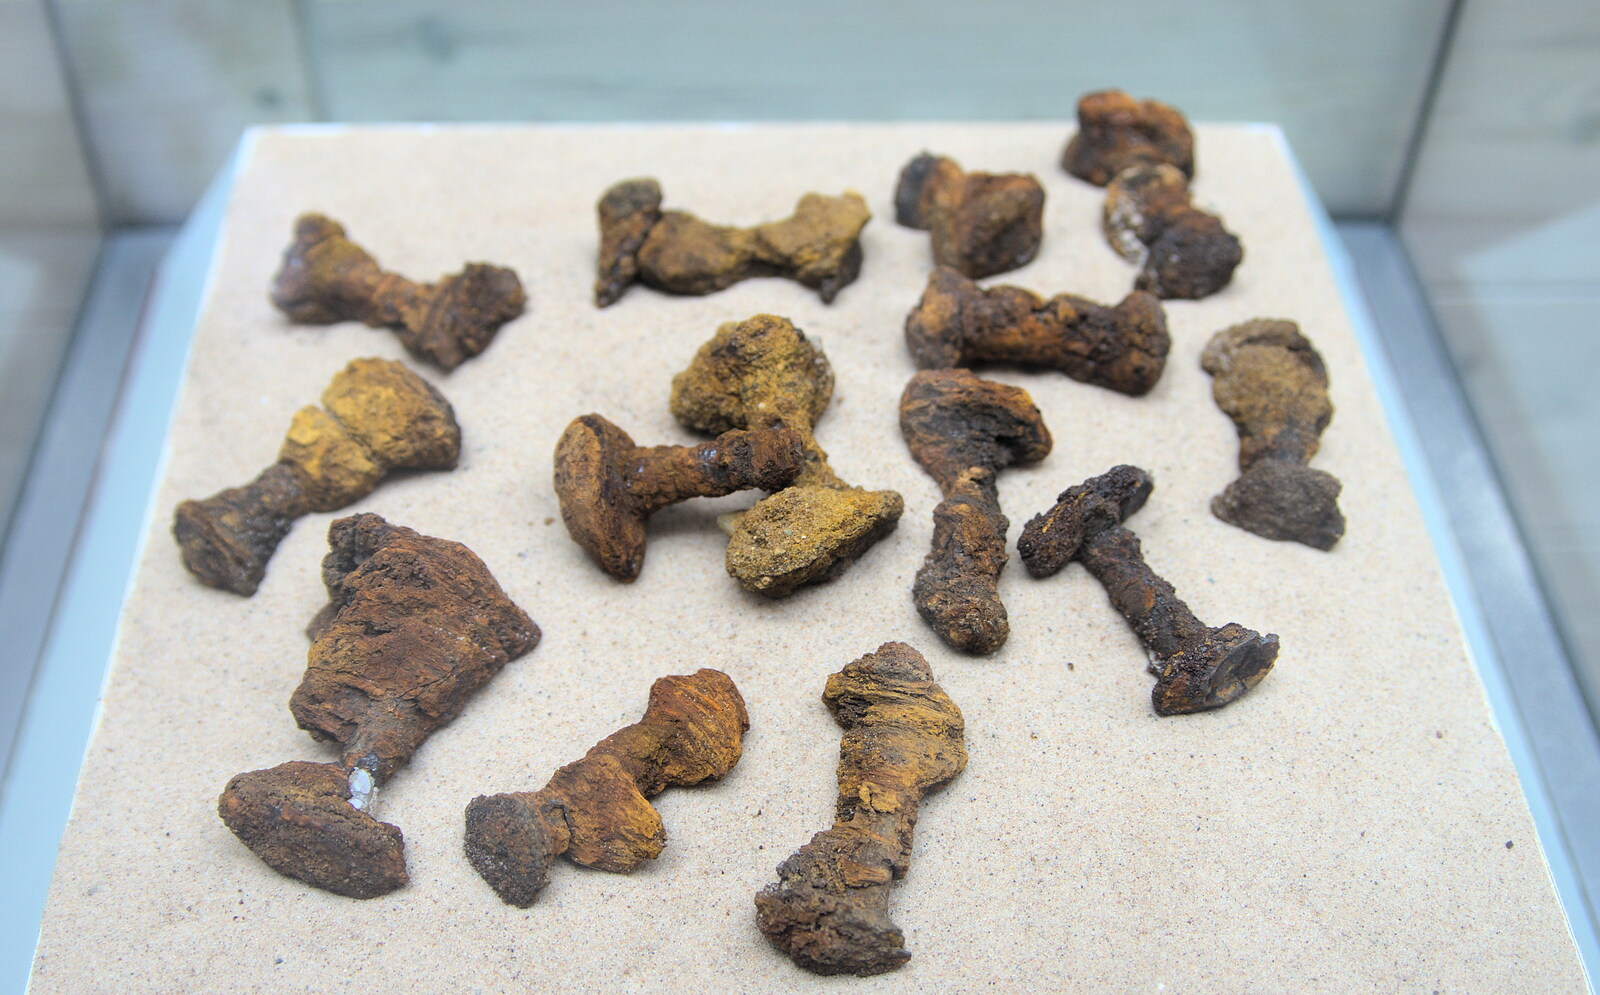 A collection of original rusty iron boat rivets from A Trip to Sutton Hoo, Woodbridge, Suffolk - 29th January 2017